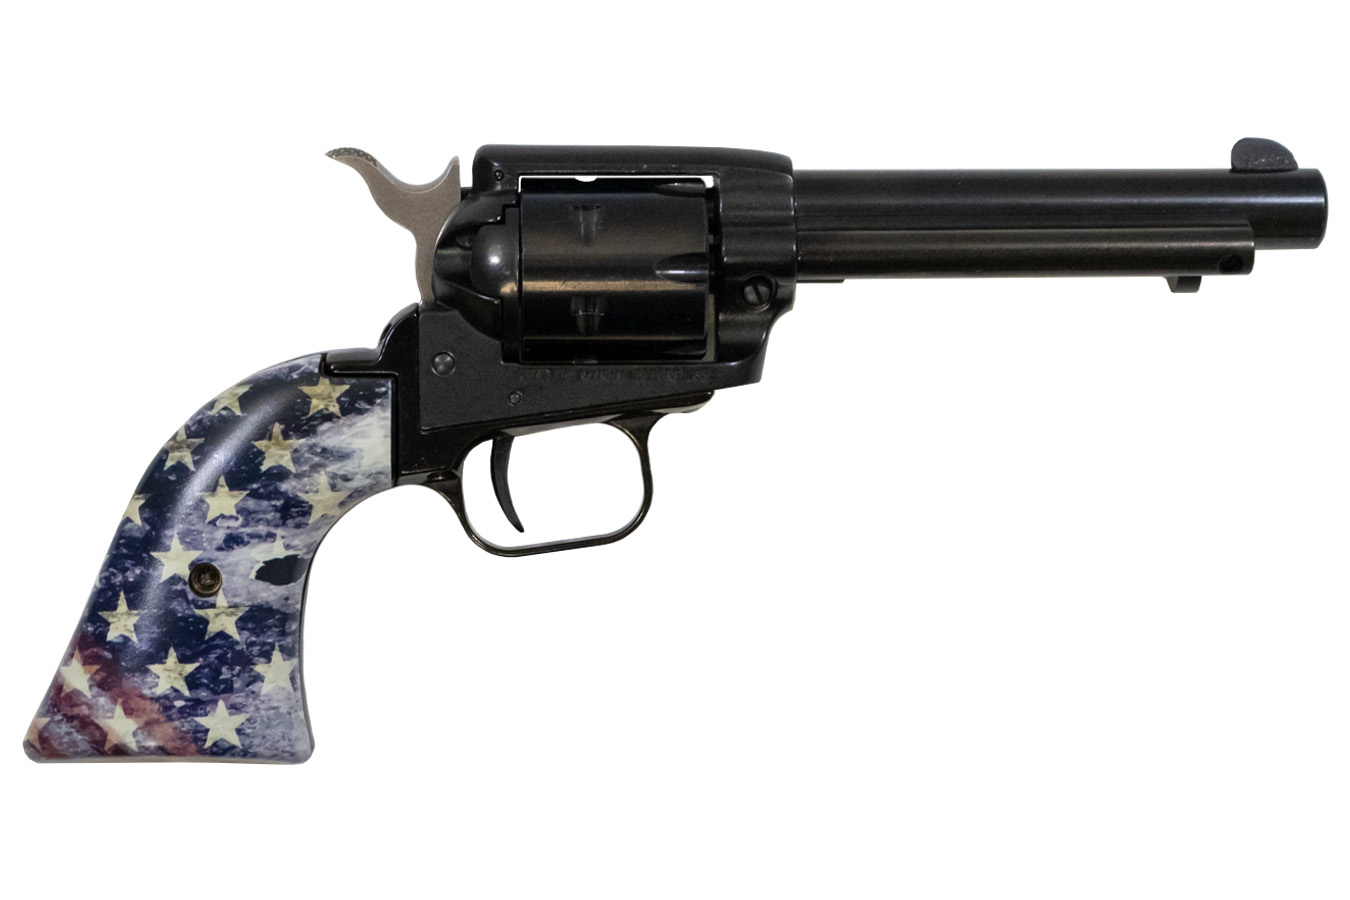 No. 14 Best Selling: HERITAGE ROUGH RIDER 22LR WITH AMERICAN FLAG GRIPS